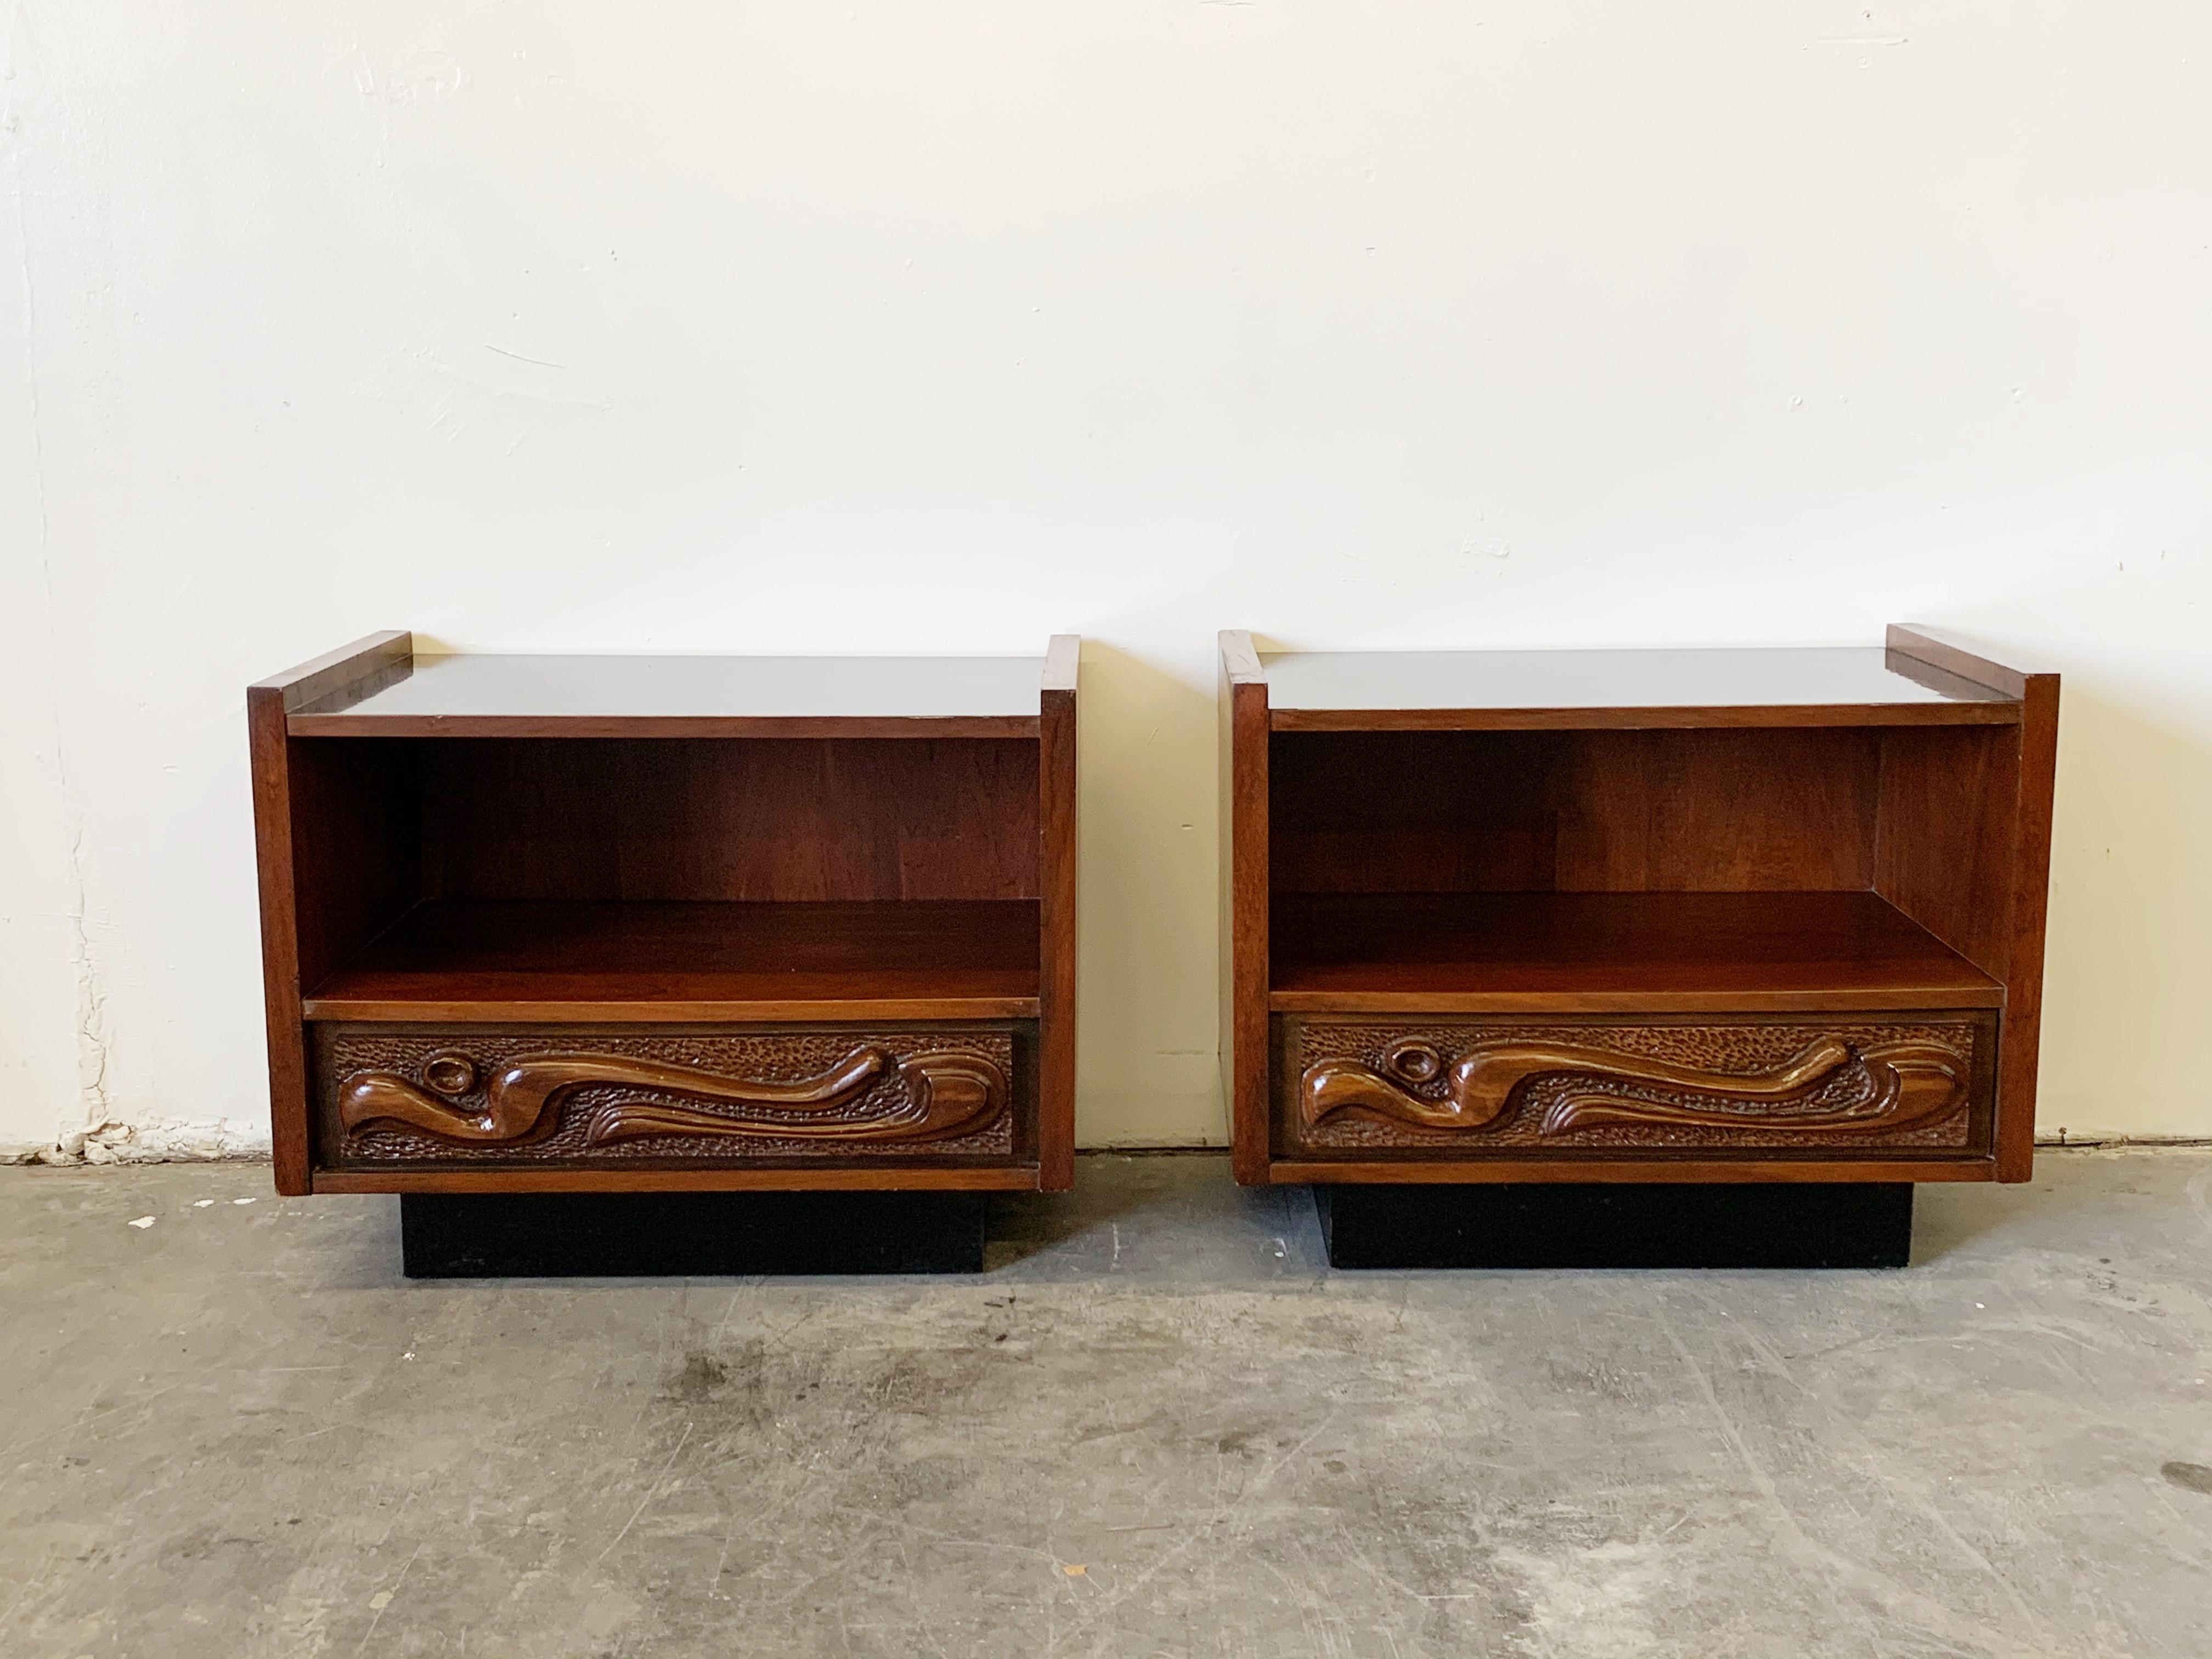 This fantastic lacquered sculpted walnut 'Oceanic' pair of nightstands are by Pulaski Furniture Corporation, circa 1969 which perfectly encapsulates the California surf mentality of the 1960s and 1970s, making this piece a highly sought after design